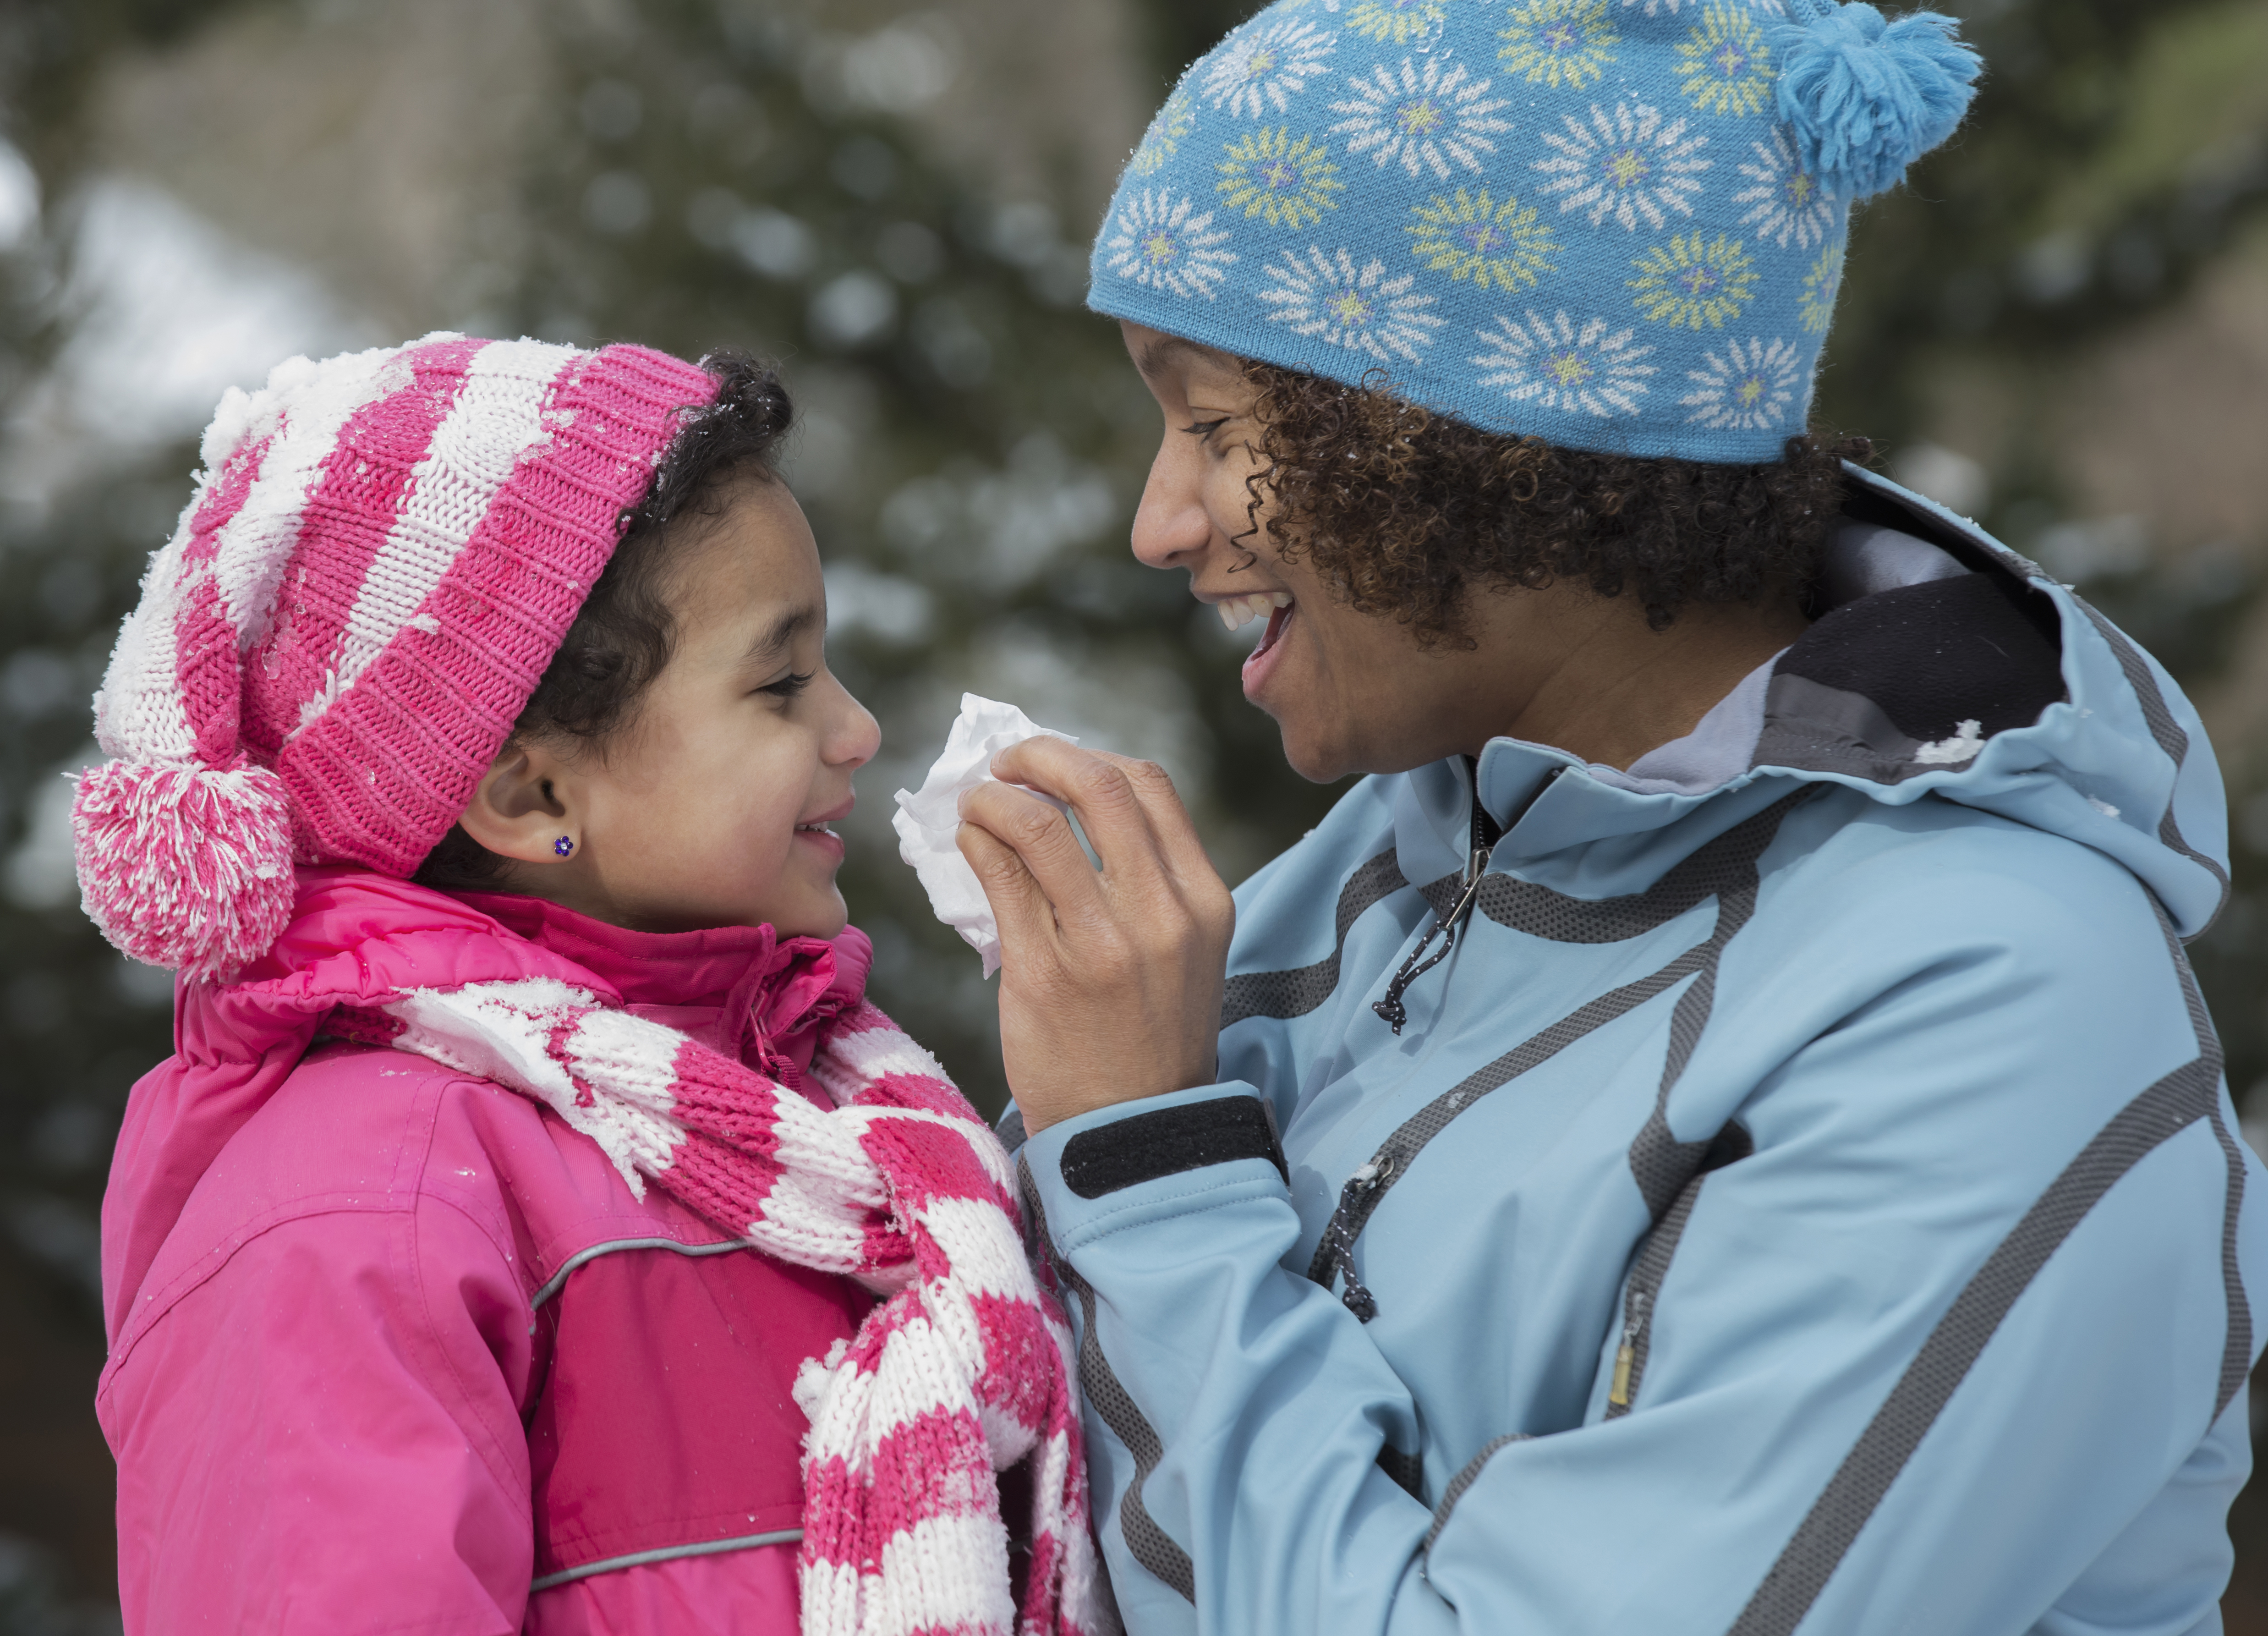 Mother wiping daughter's nose in snow outdoors